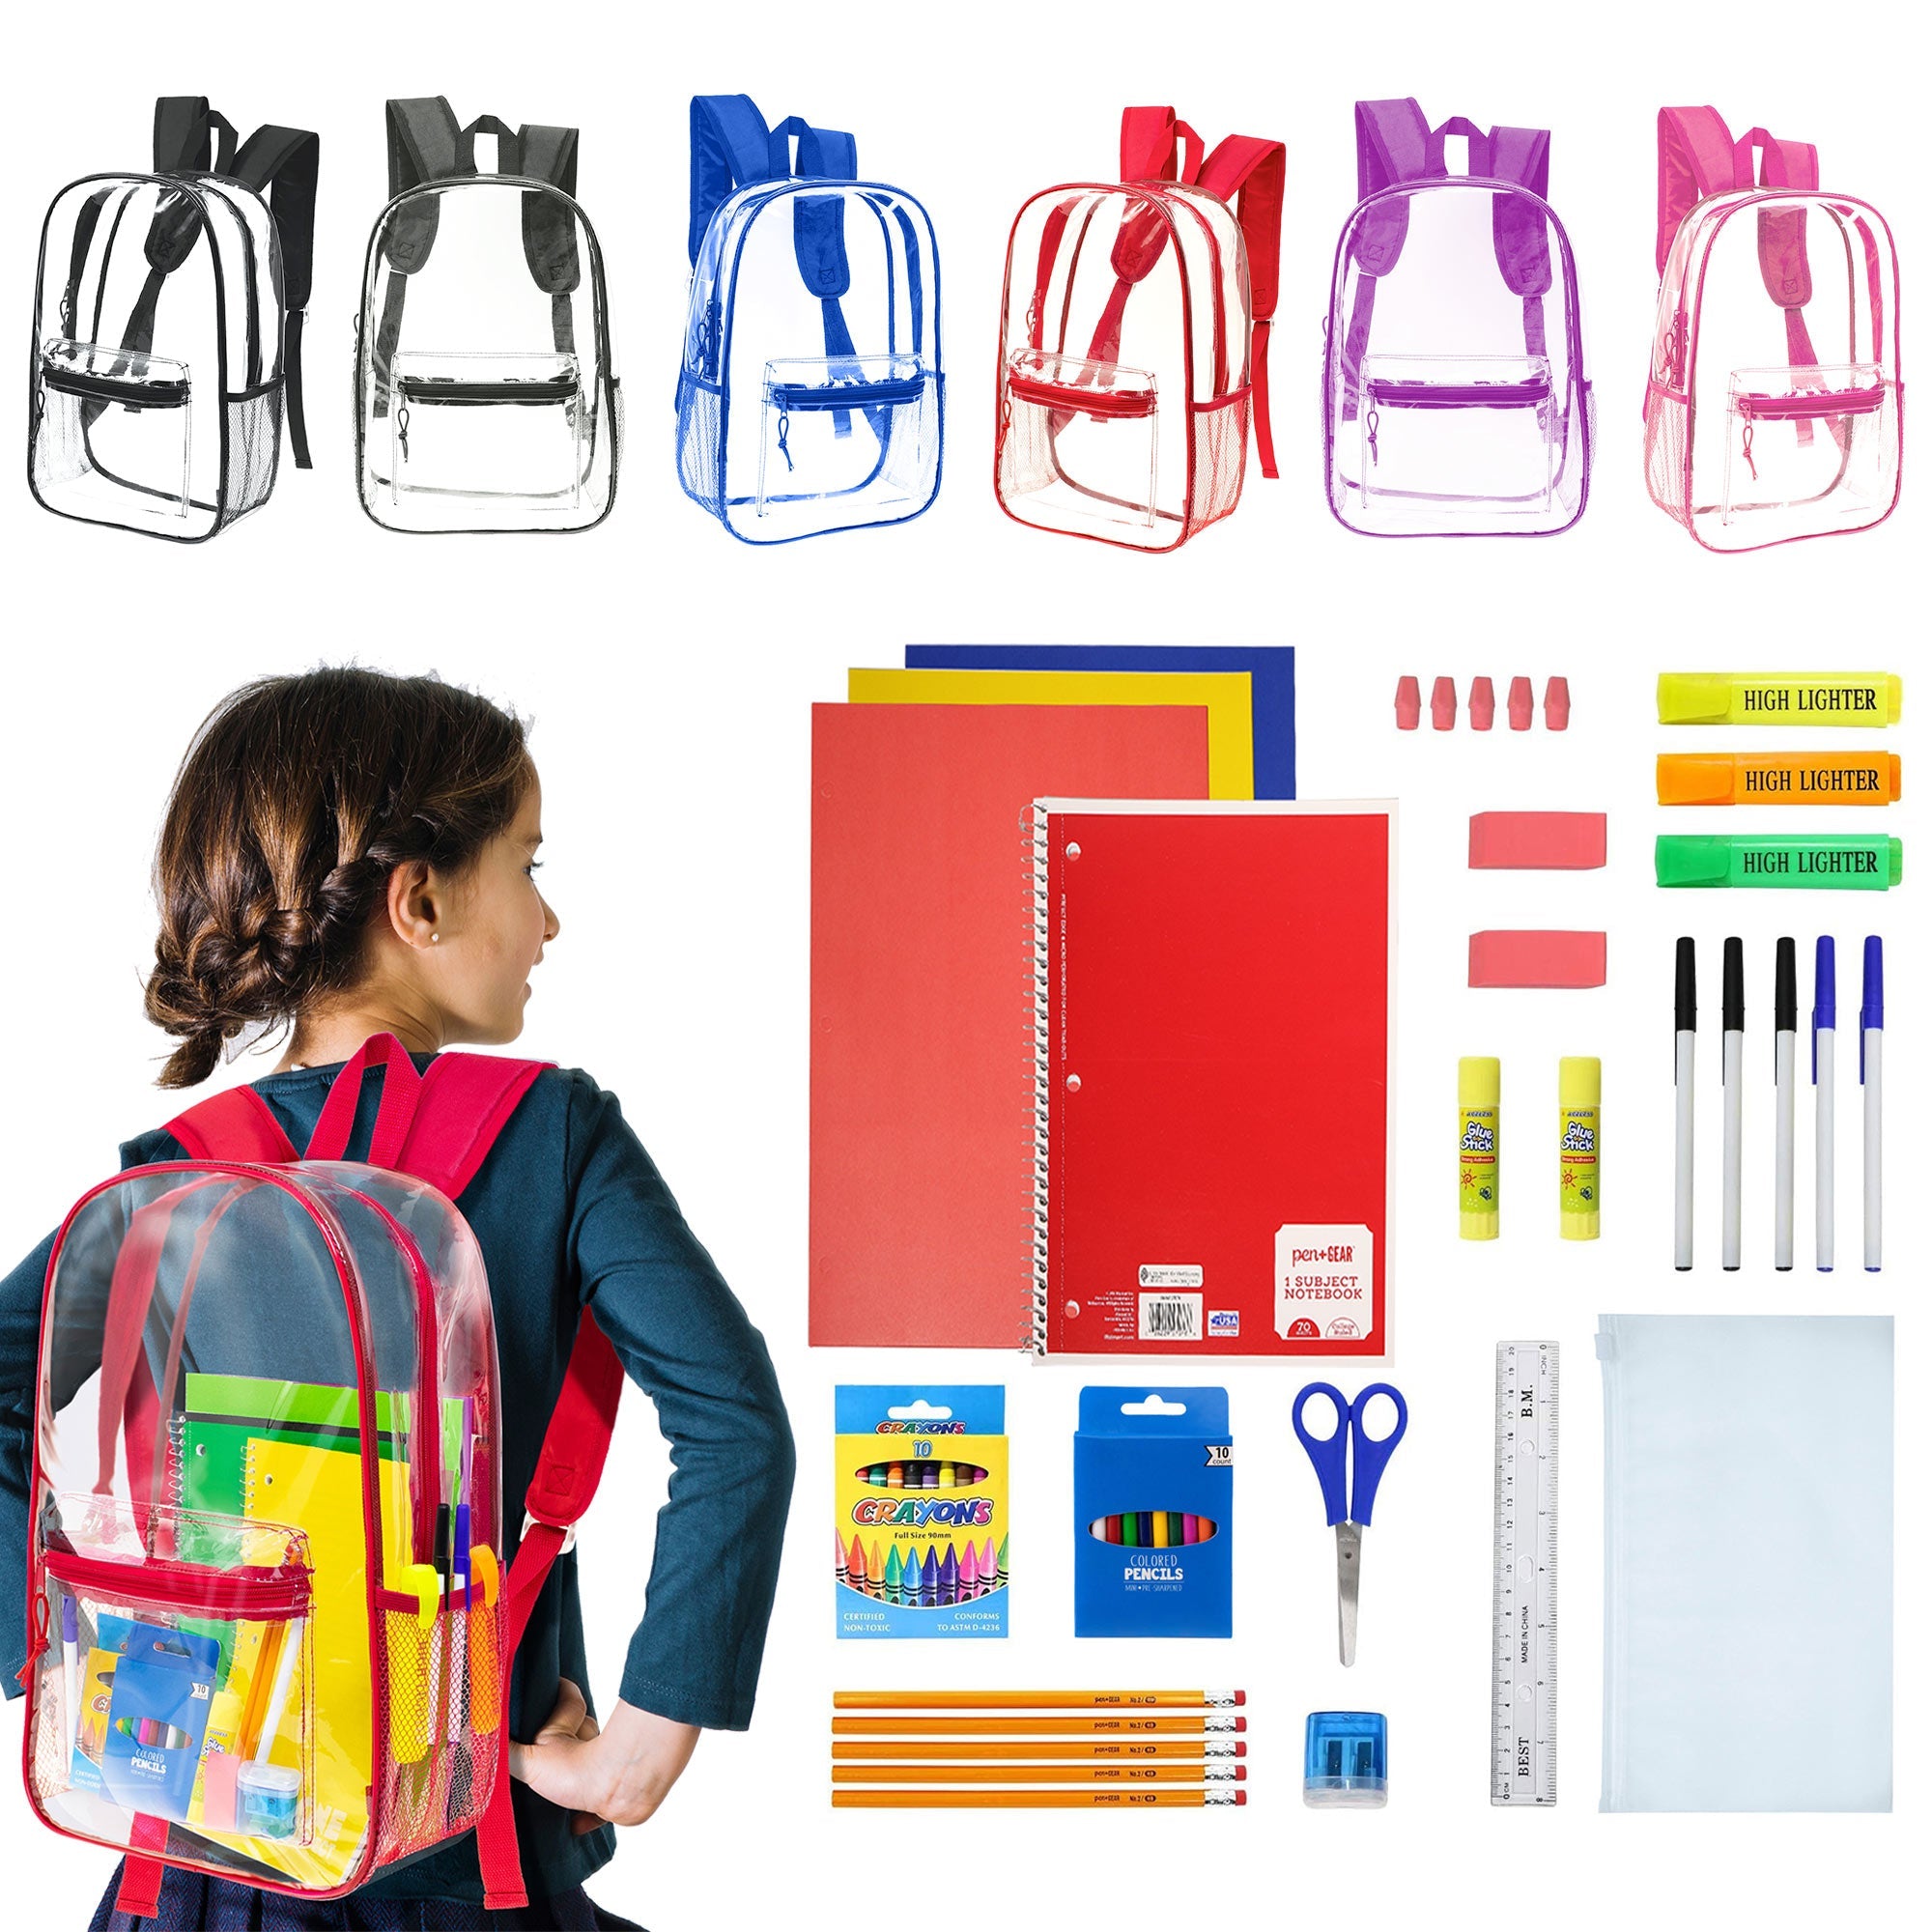 12 Clear Wholesale 17" Backpacks in Assorted Colors and 12 Bulk School Supply Kits of Your Choice